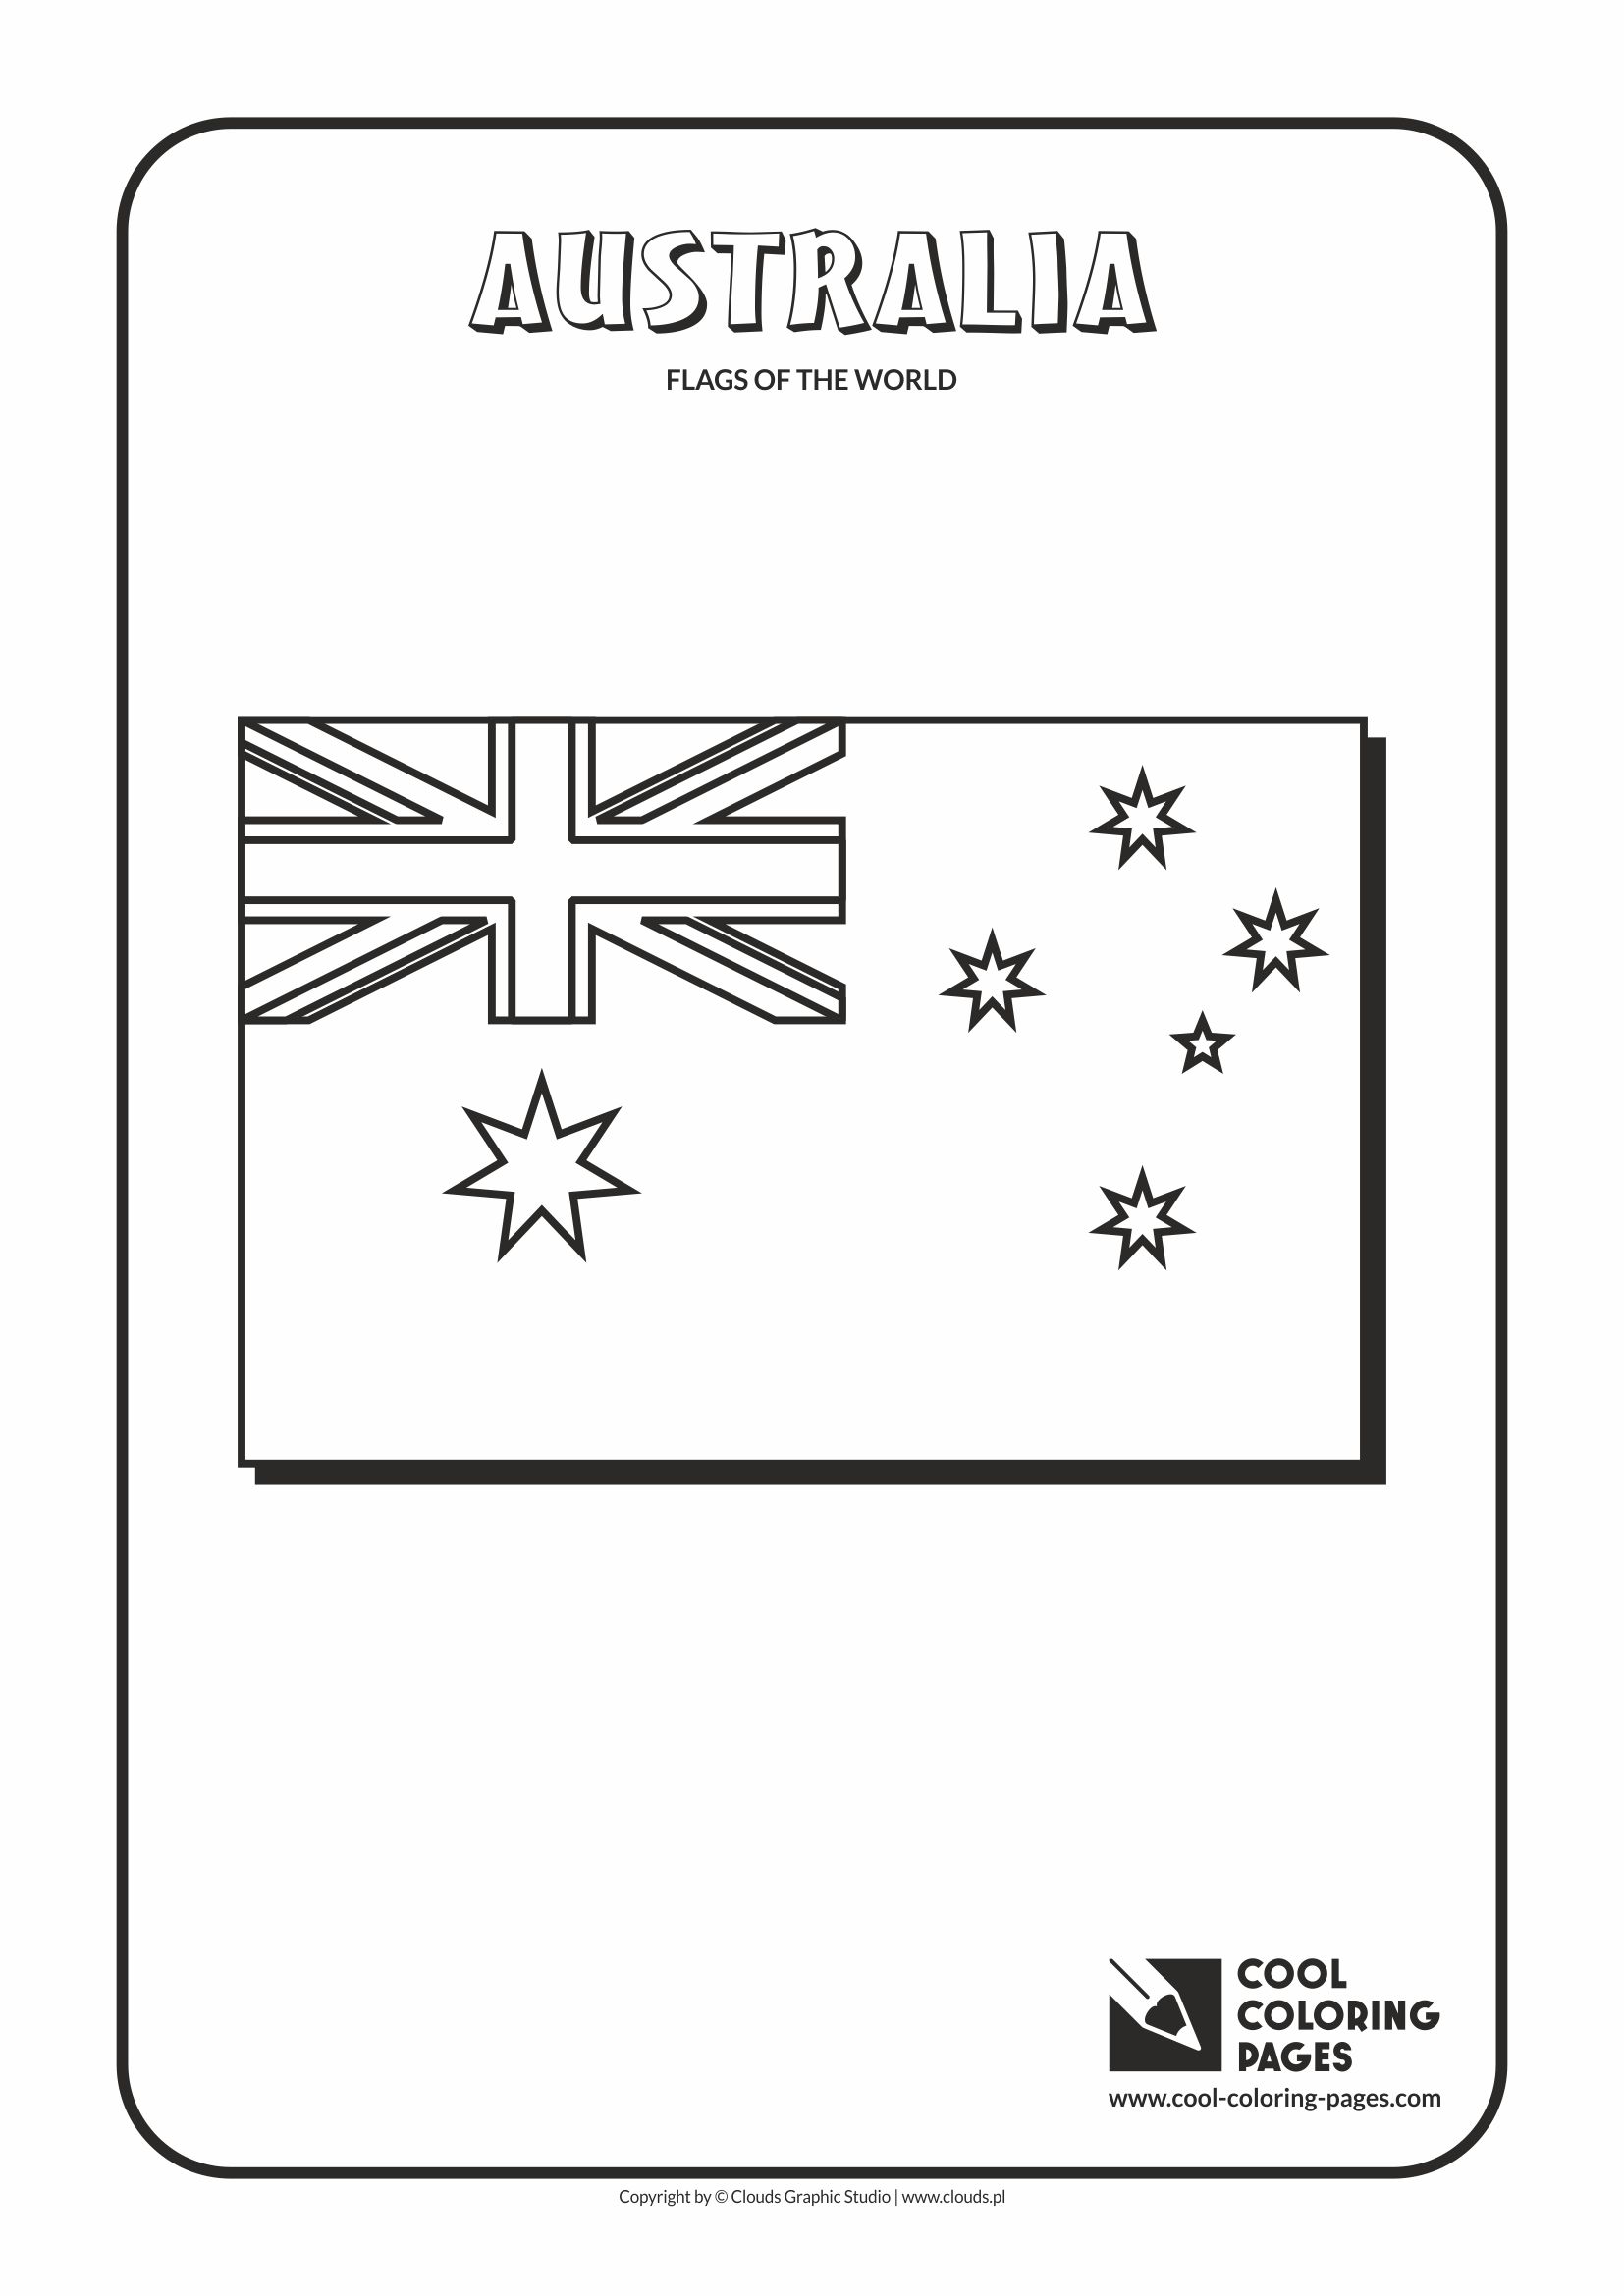 Cool coloring pages flags of the world